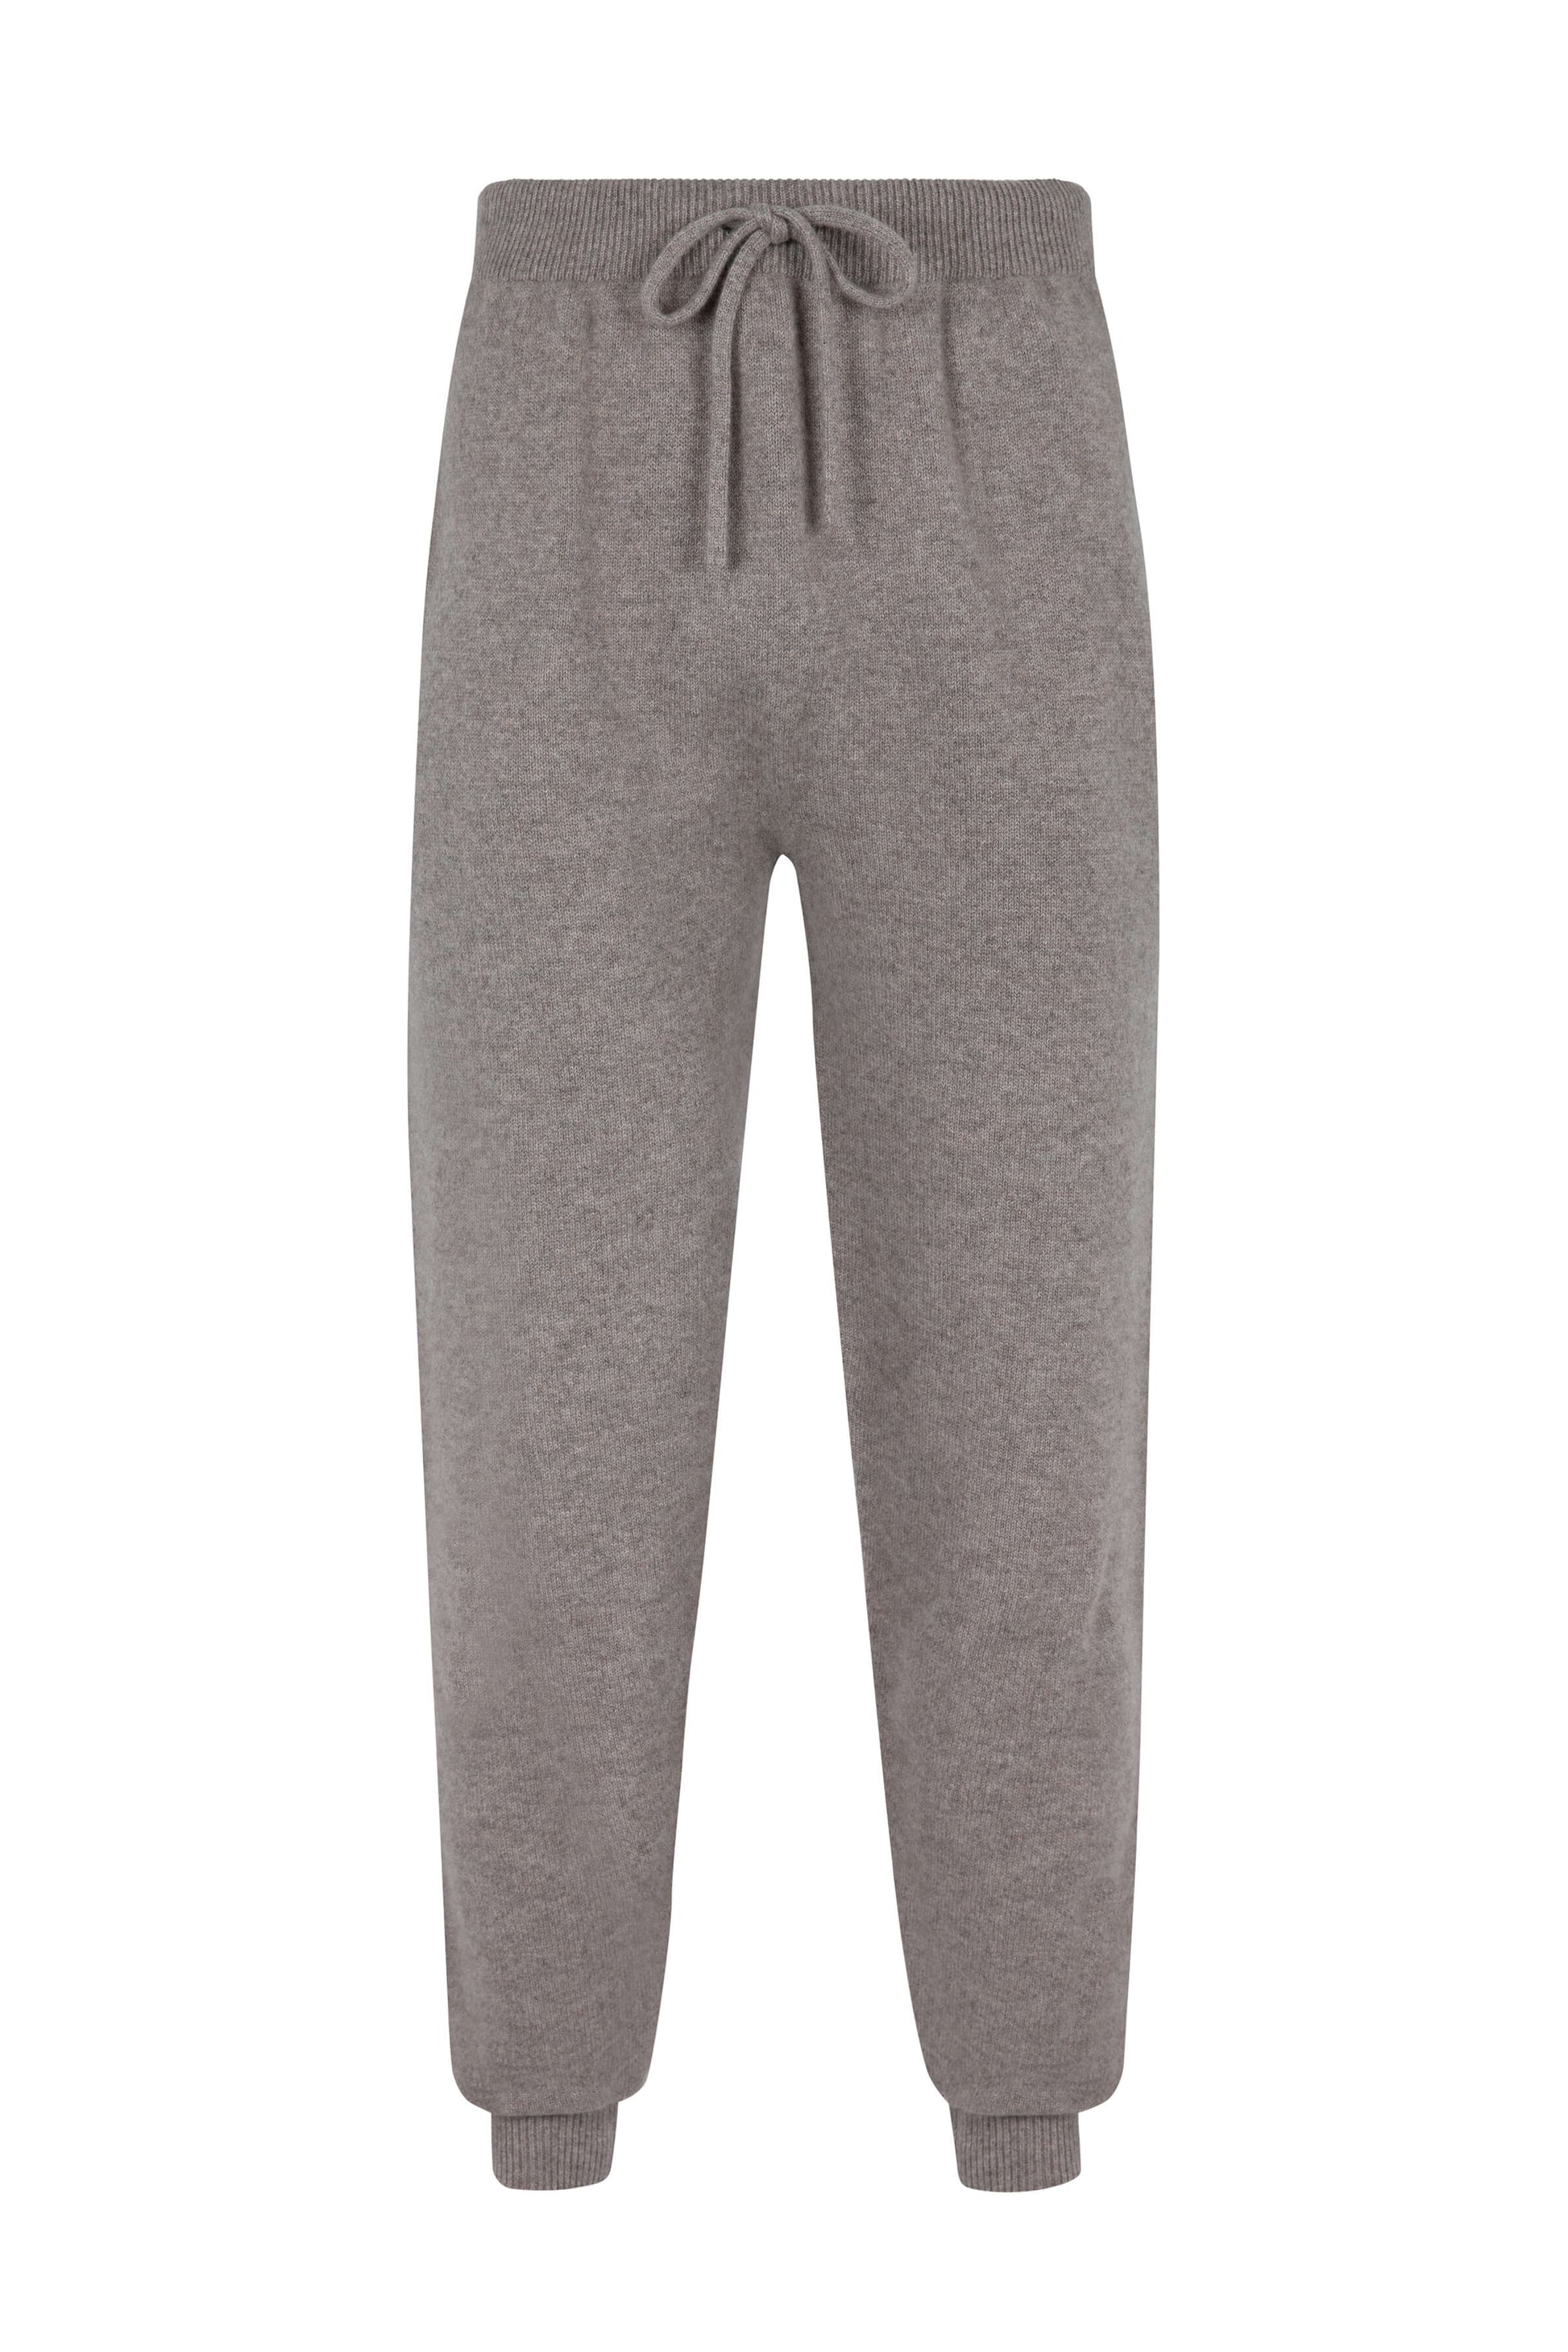 Men's Cashmere Joggers in Pebble – Johnstons of Elgin